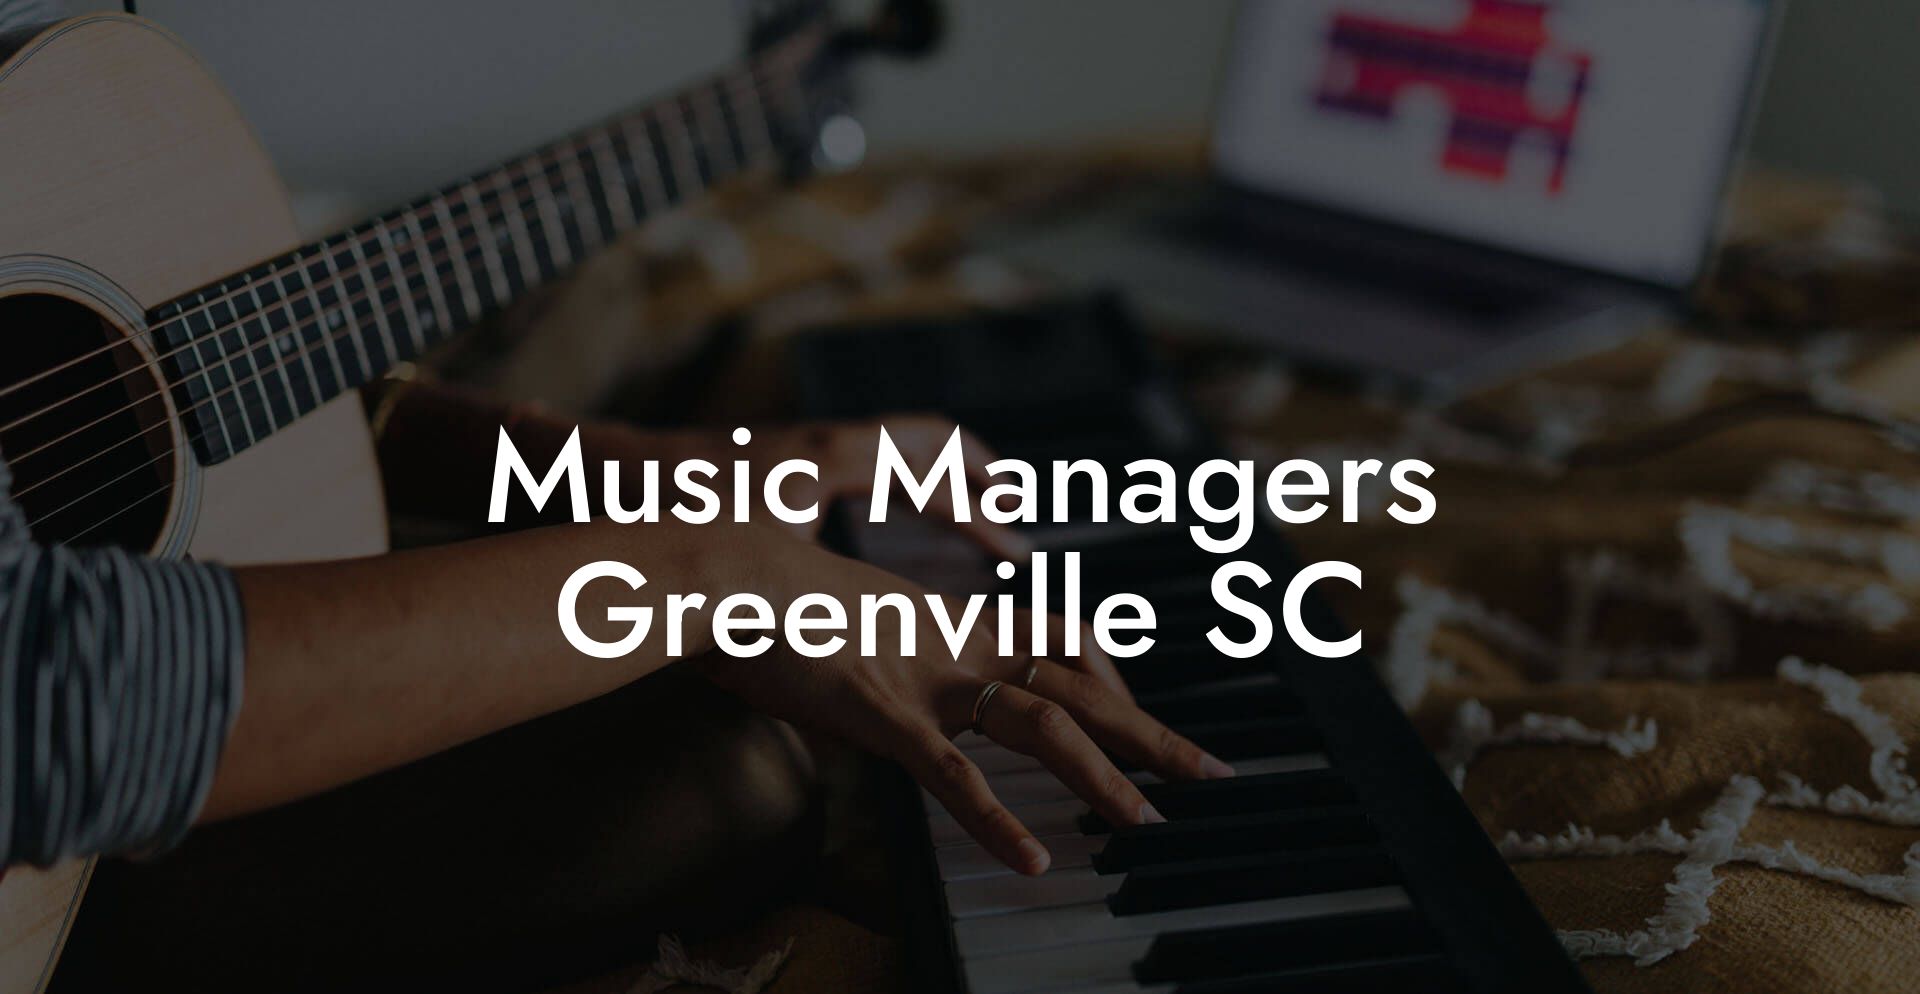 Music Managers Greenville SC